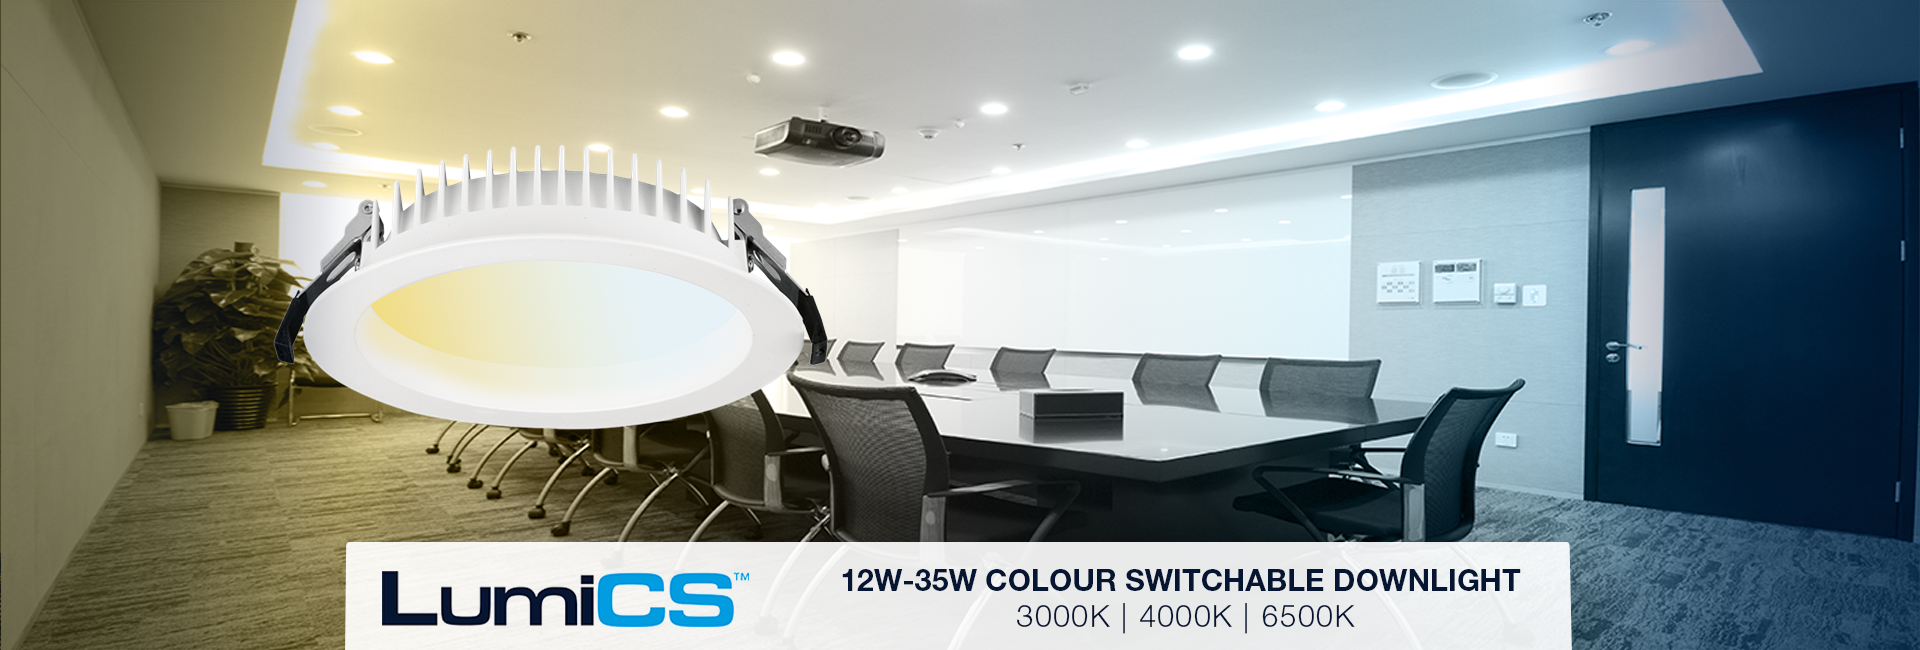 Show products in category New LumiCS Colour Switchable Downlight